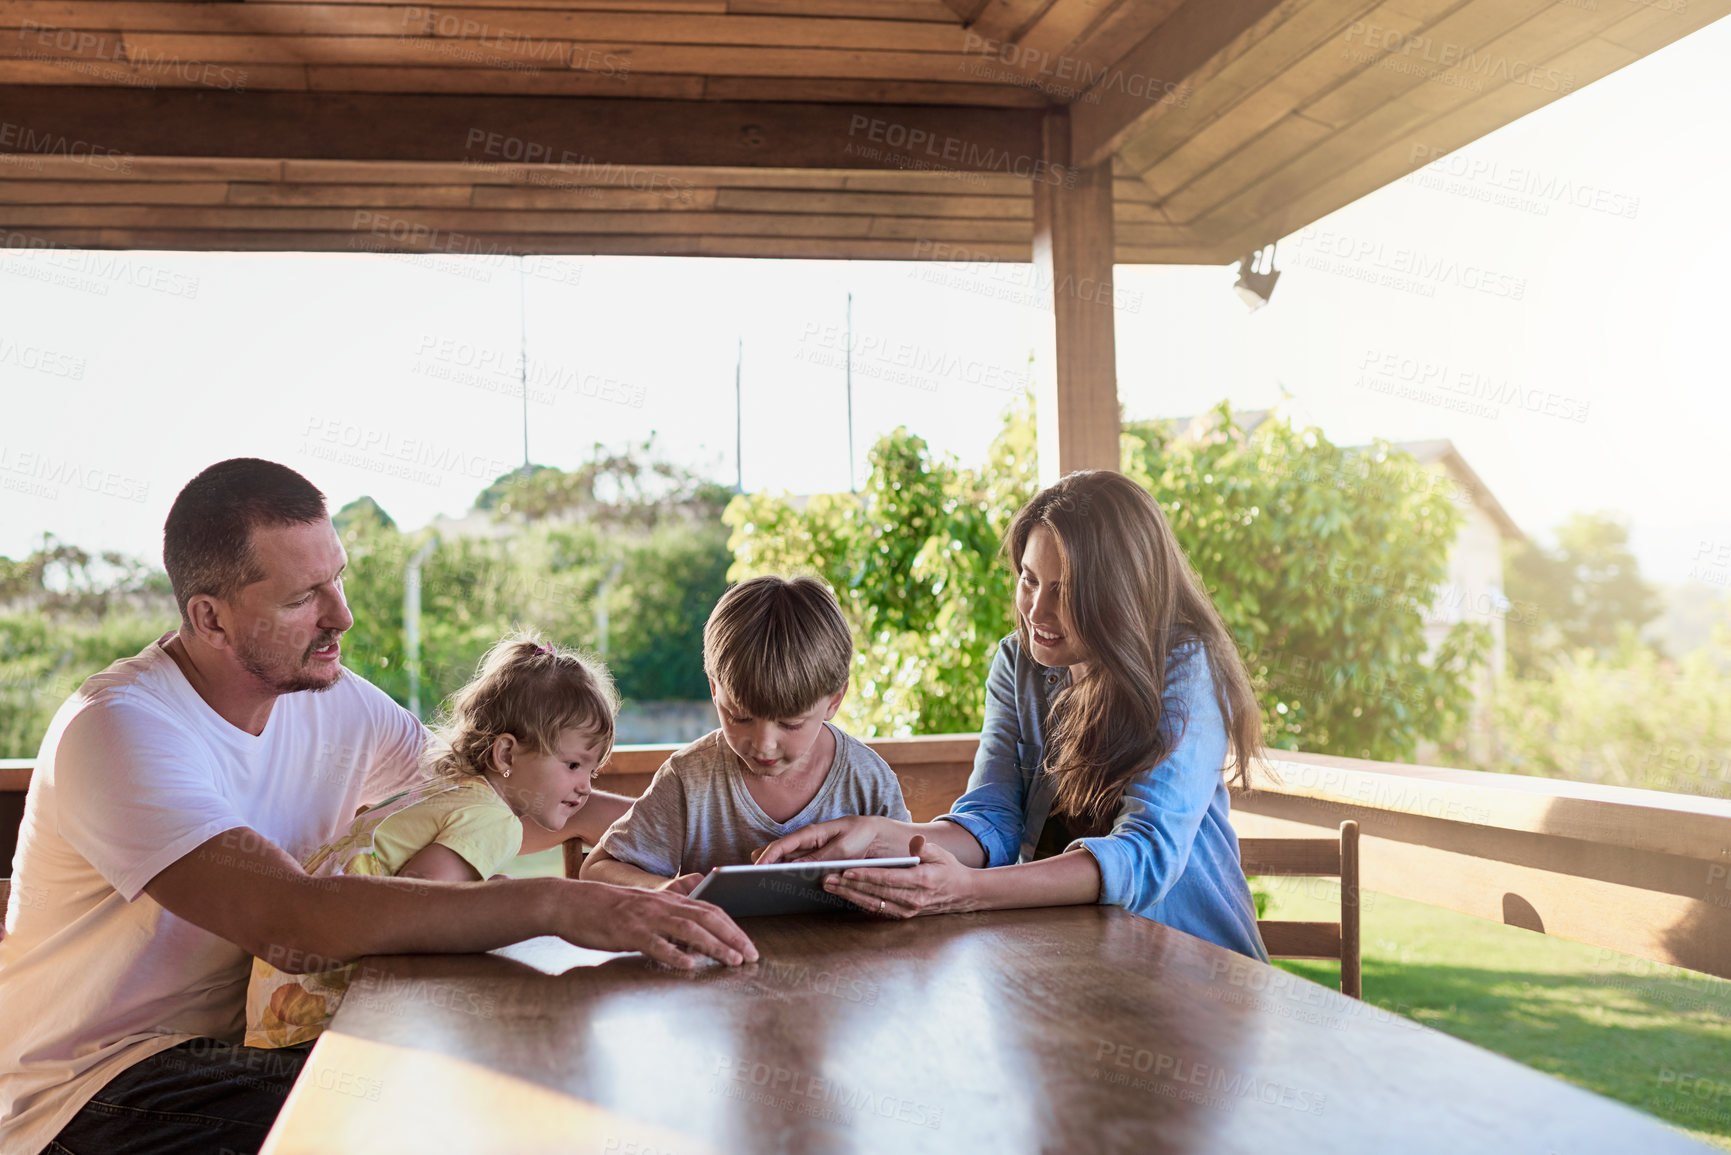 Buy stock photo Shot of a family using a digital tablet together outdoors